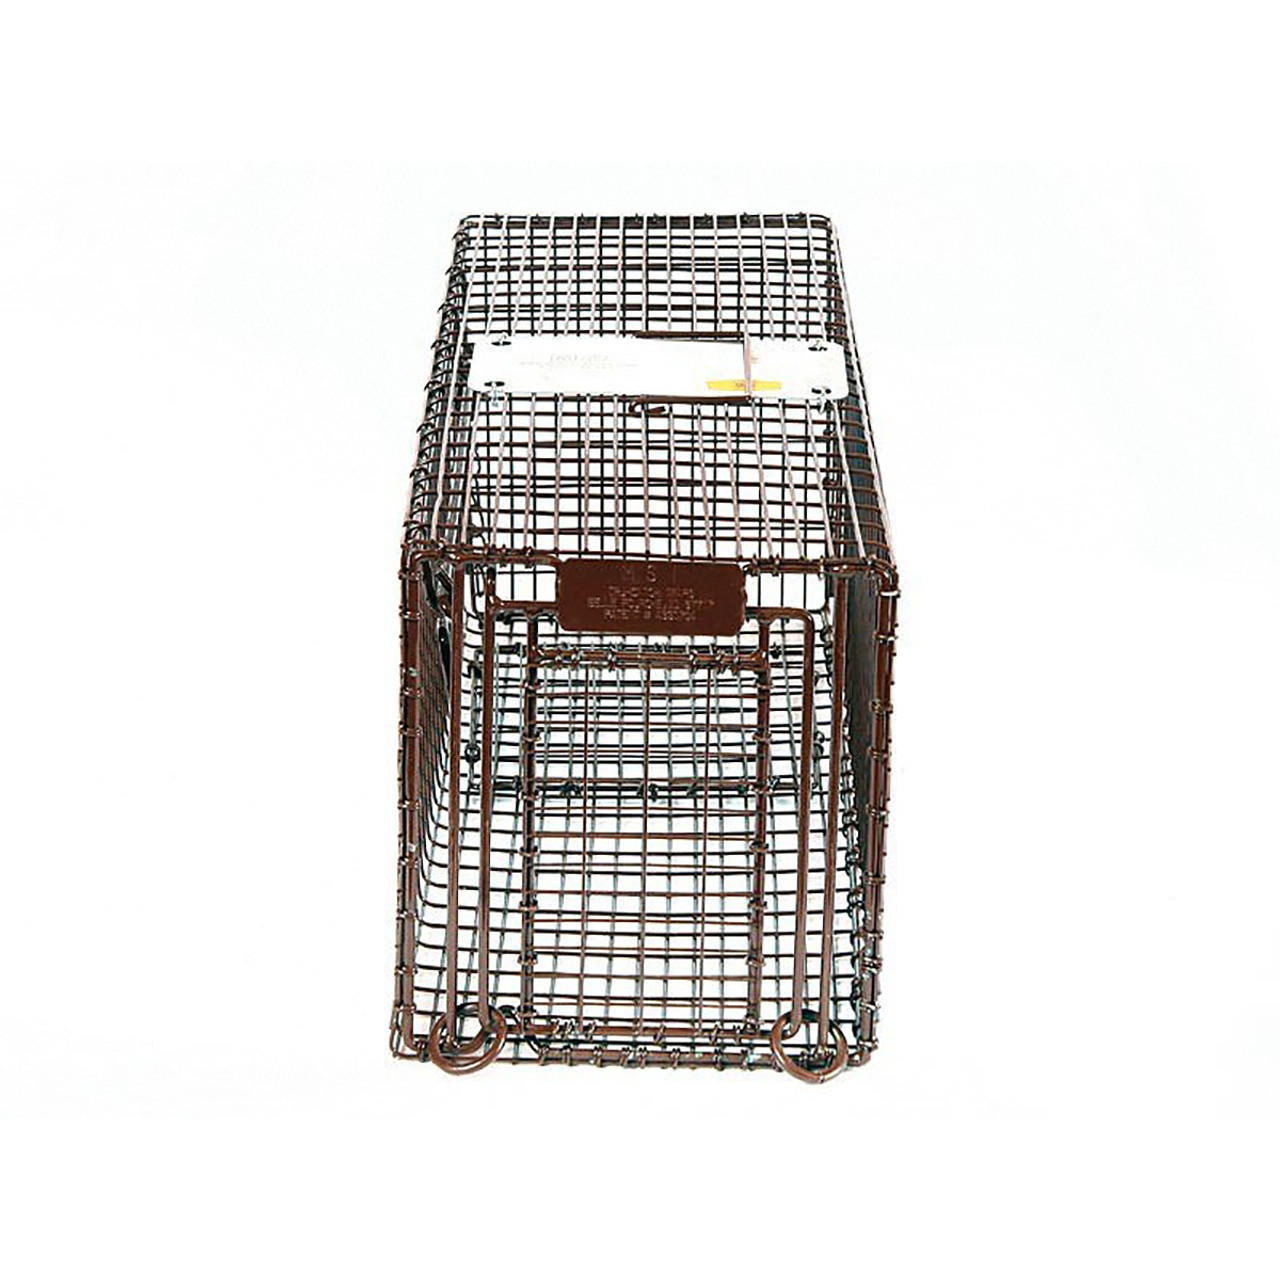 72D - Extra Large Animal Trap